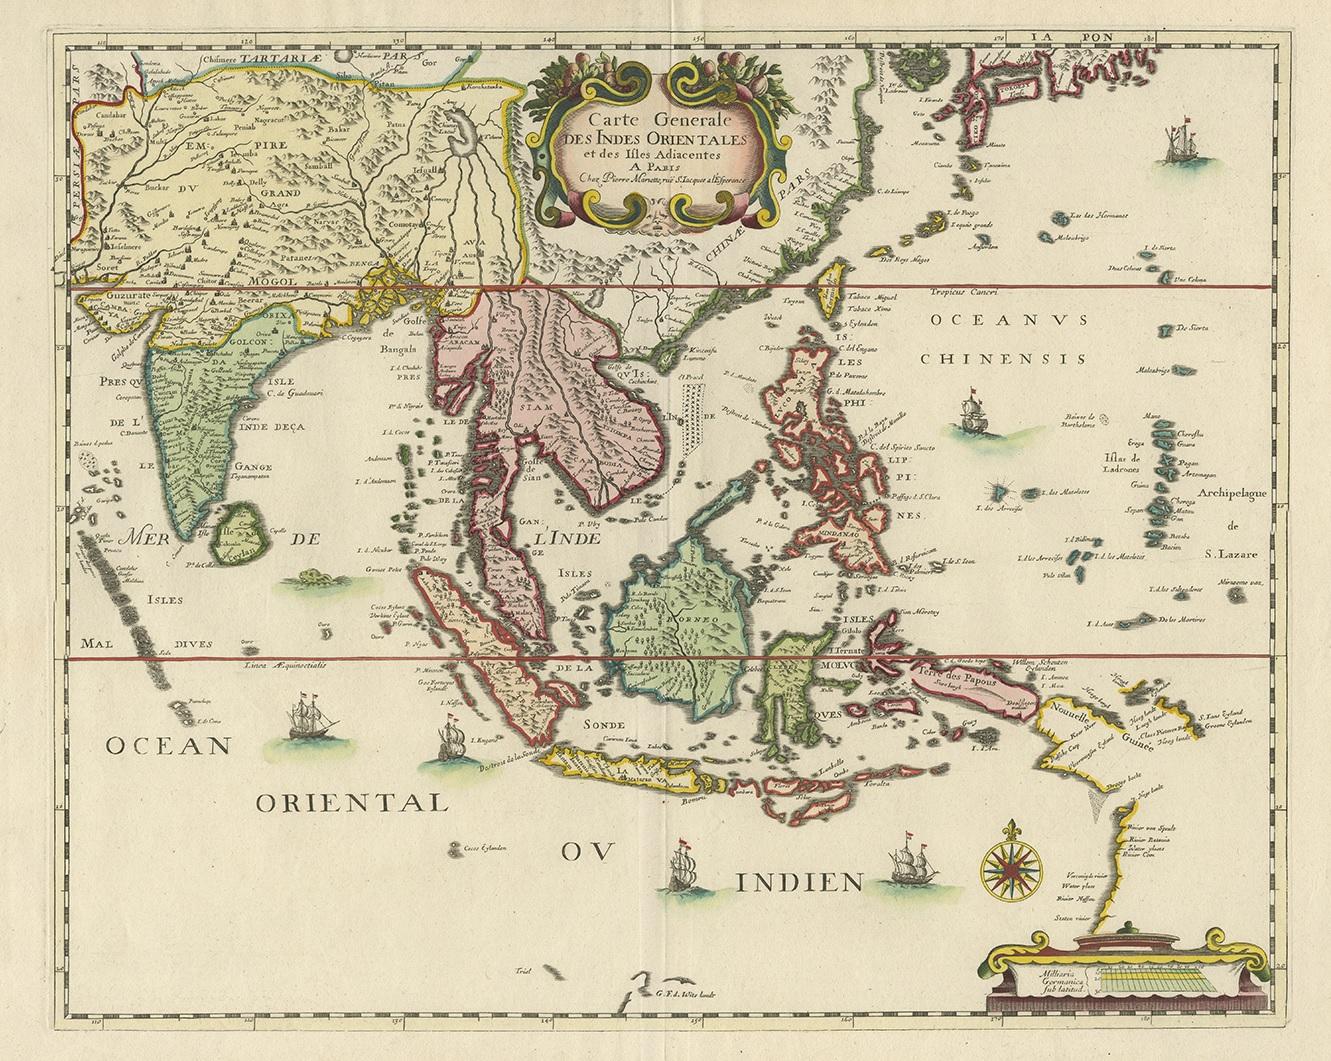 Antique map titled 'Carte Generale Des Indes Orientales et des Isles Adiacentes'. Uncommon, early map of Southeast Asia from the Maldives to the South of Japan with parts of the northern Australian coast, published separately by Pierre Mariette.